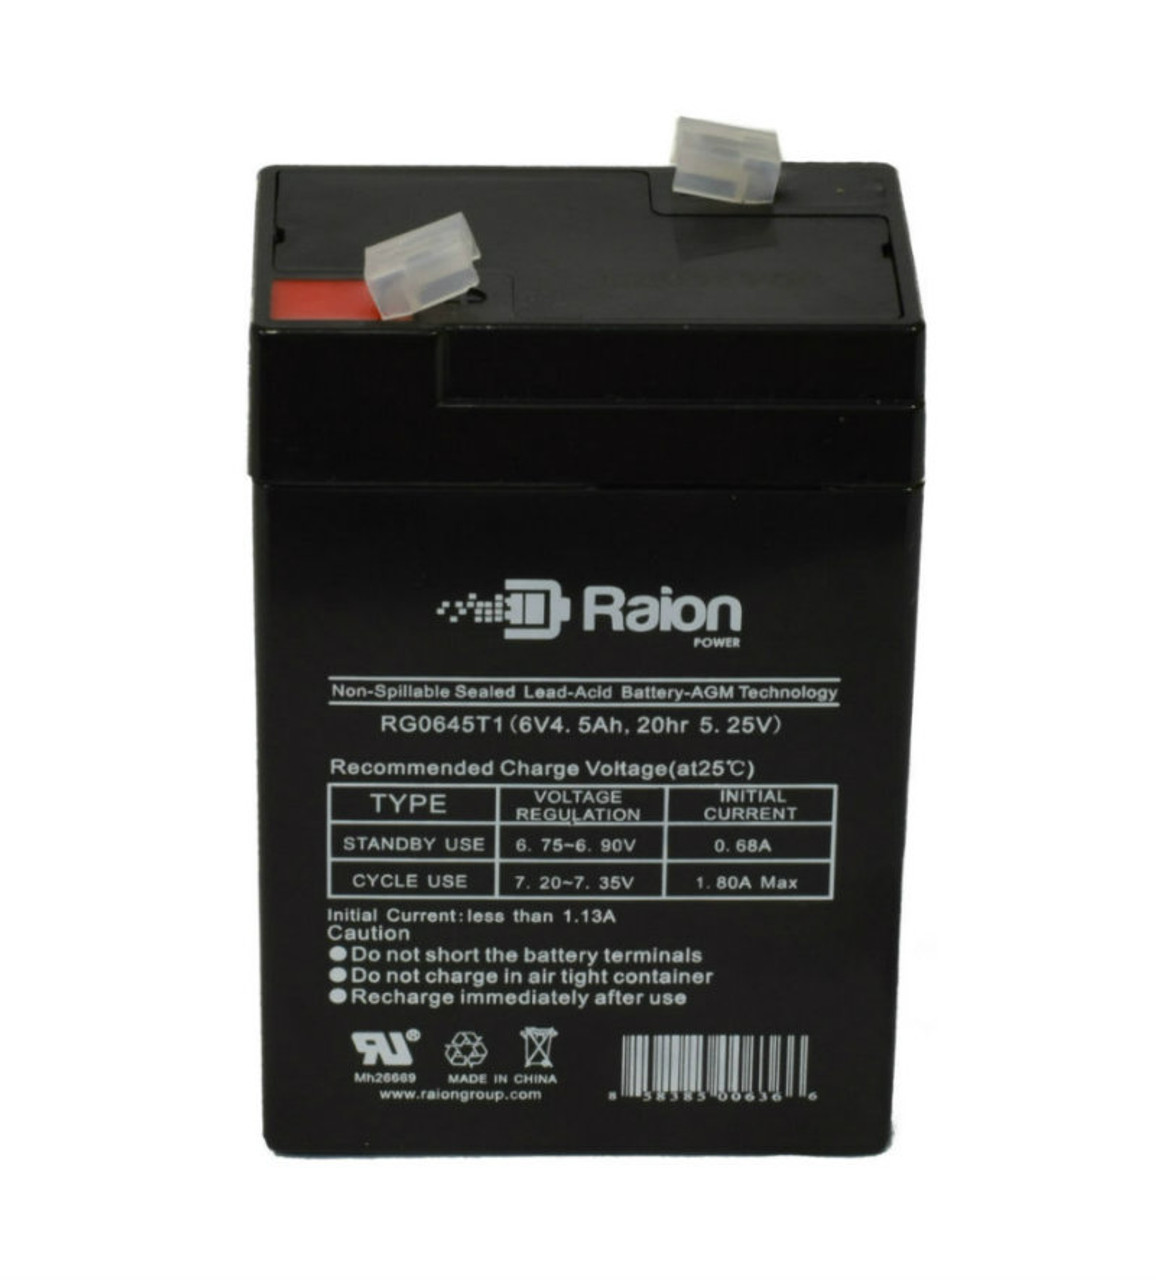 Raion Power RG0645T1 Replacement Battery Cartridge for Peg Perego IGED1079 6V Tool Express